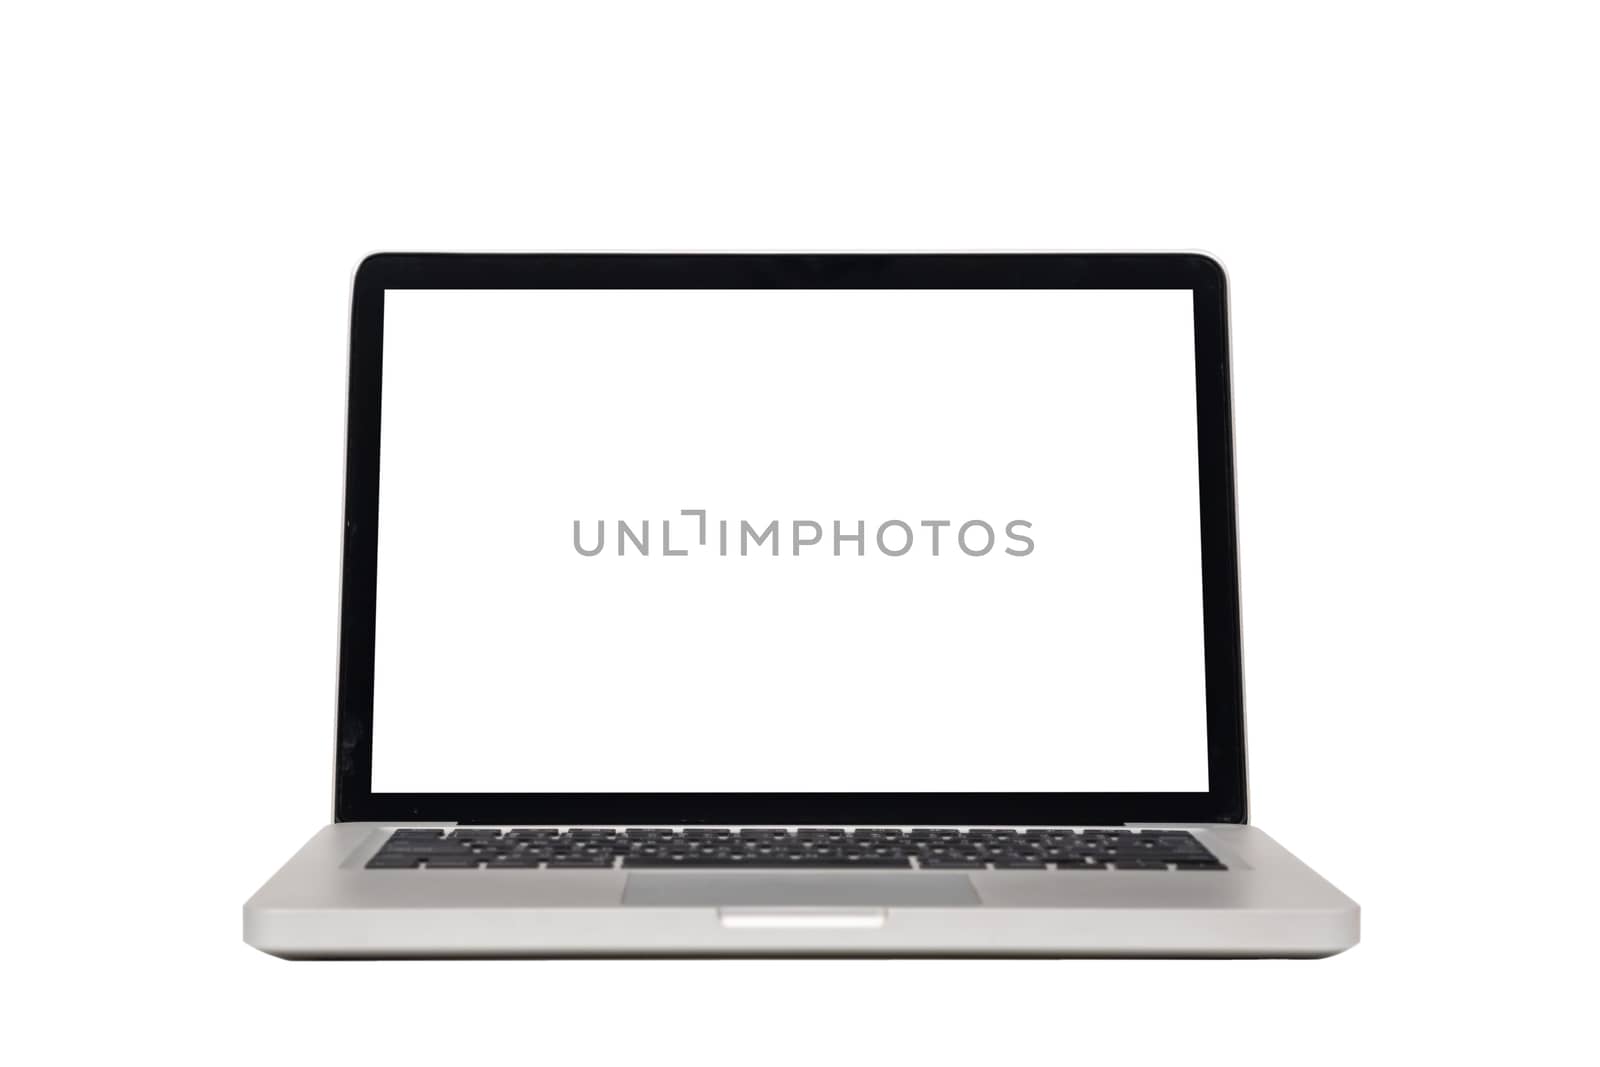 laptop computer mock up with empty blank white screen isolated on white background with clipping path, front view. modern computer technology concept